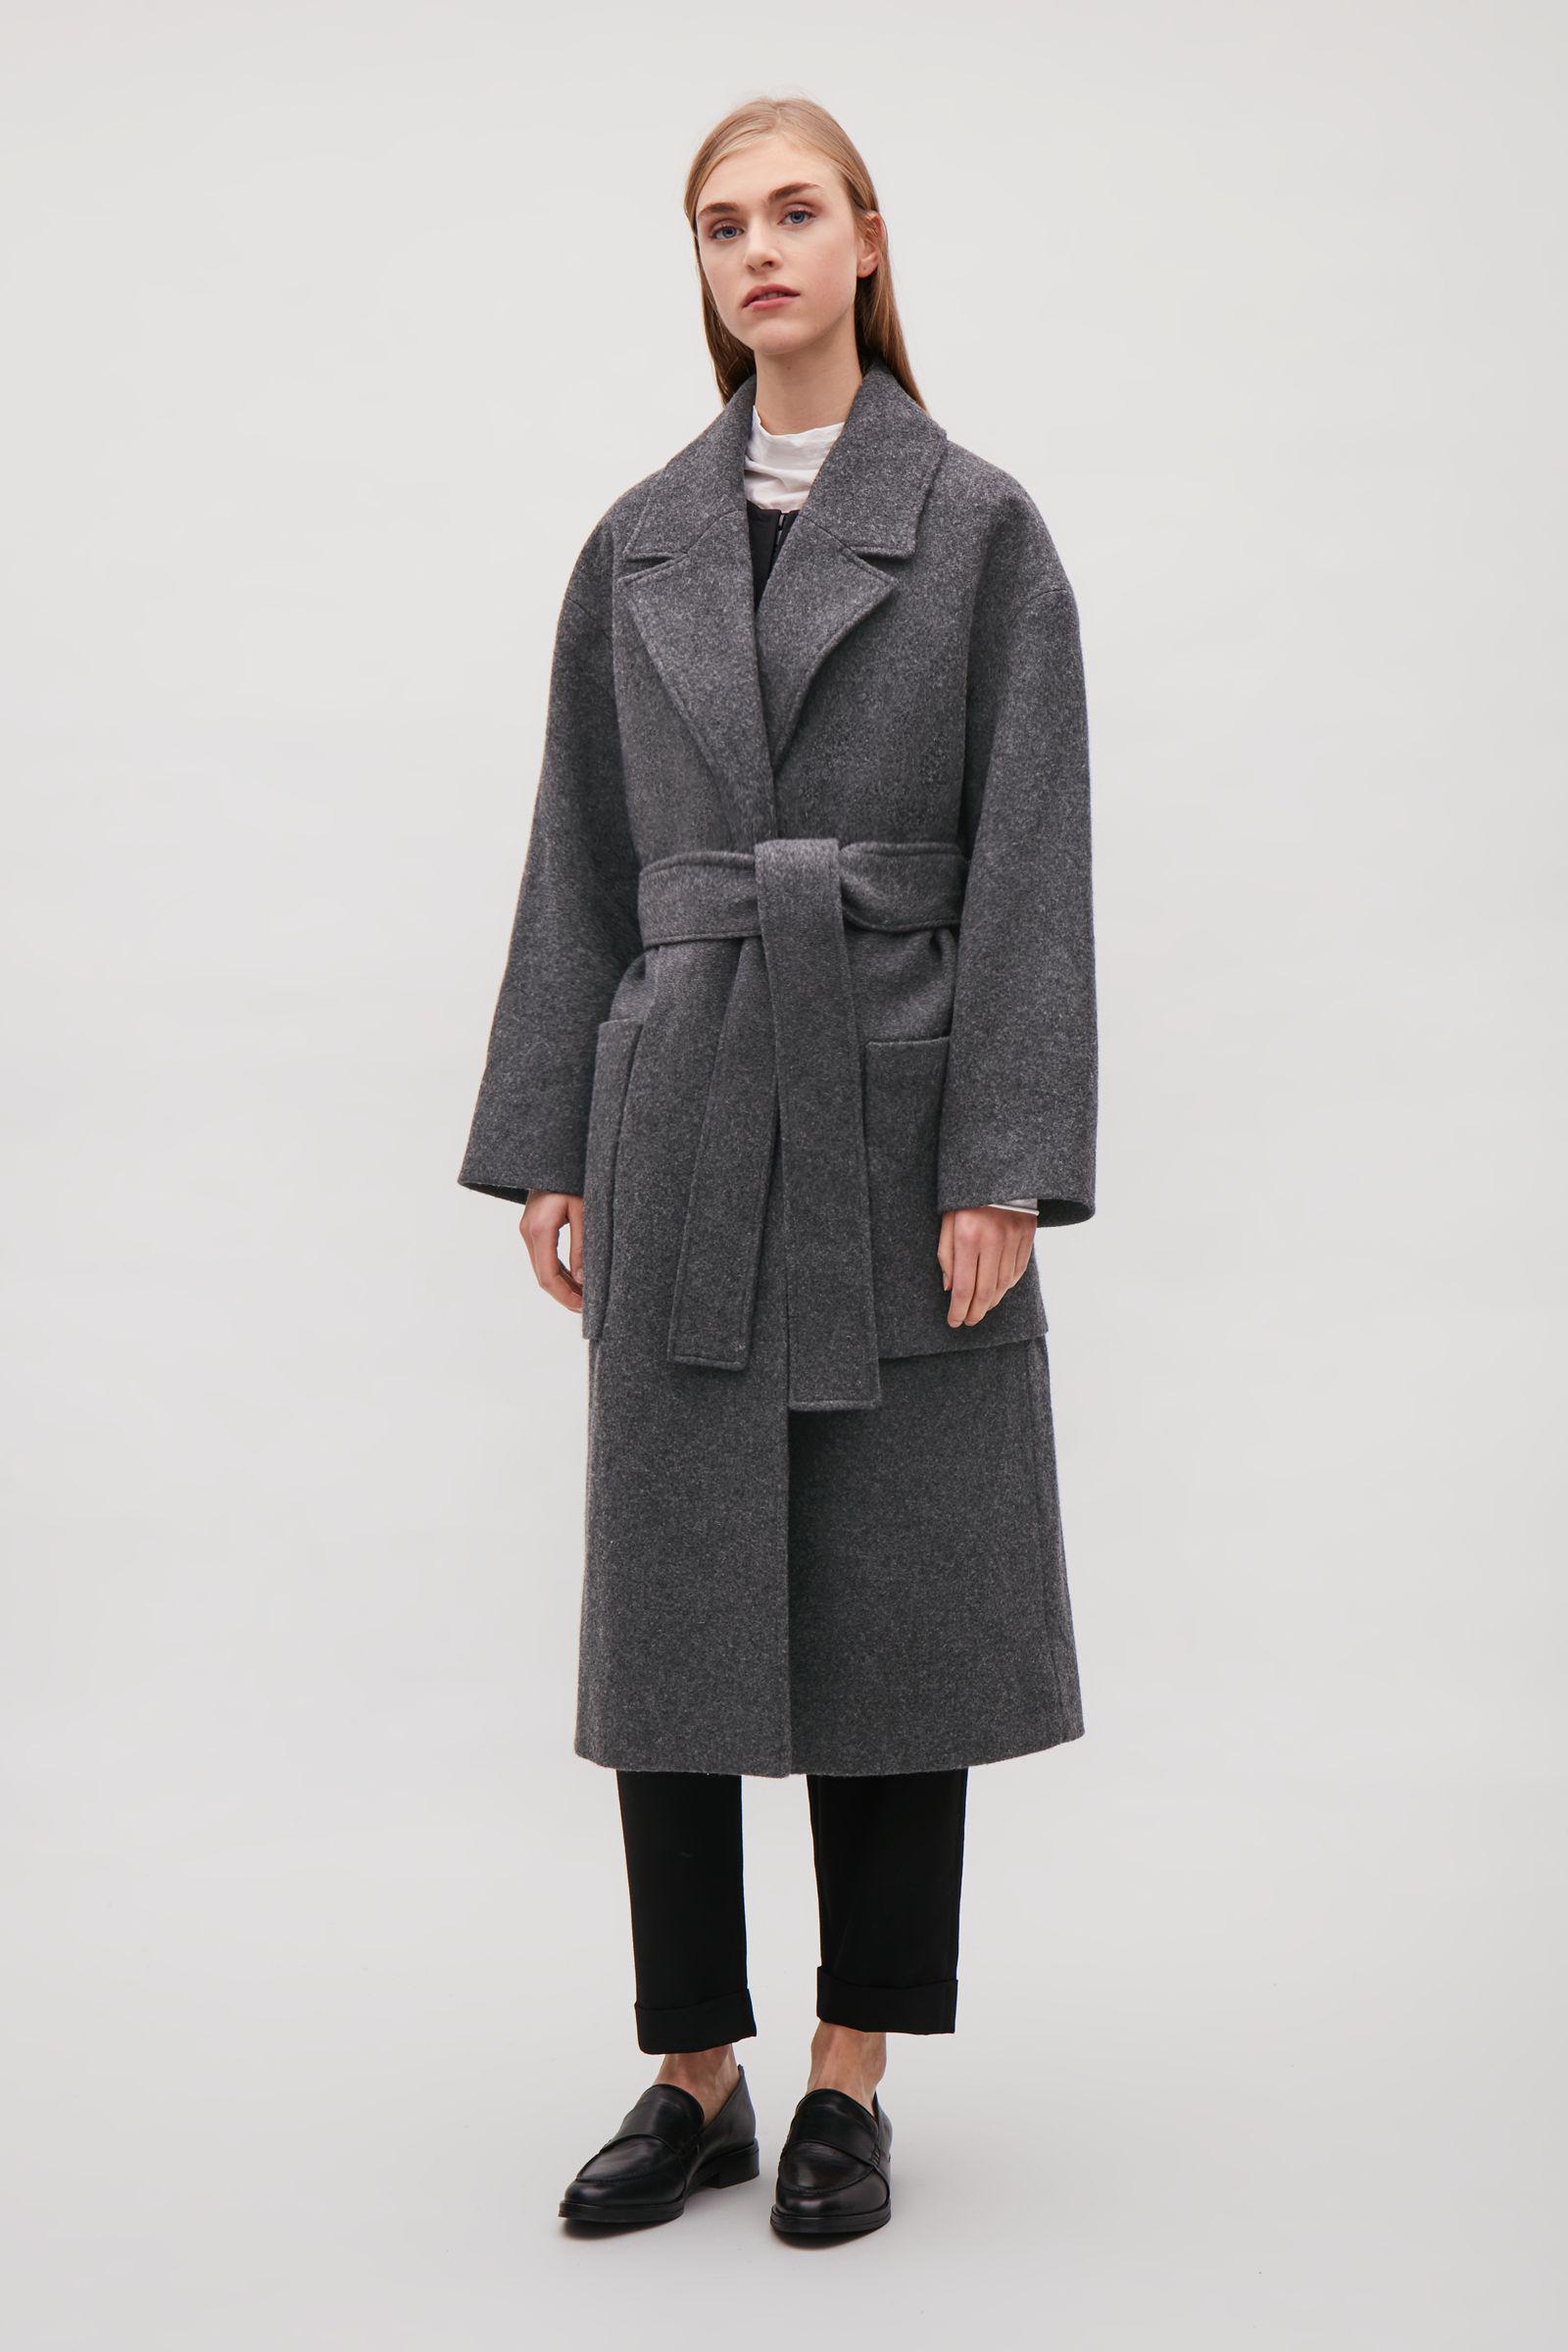 COS Wool Oversized Double-breasted Coat in Dark Grey (Gray) | Lyst